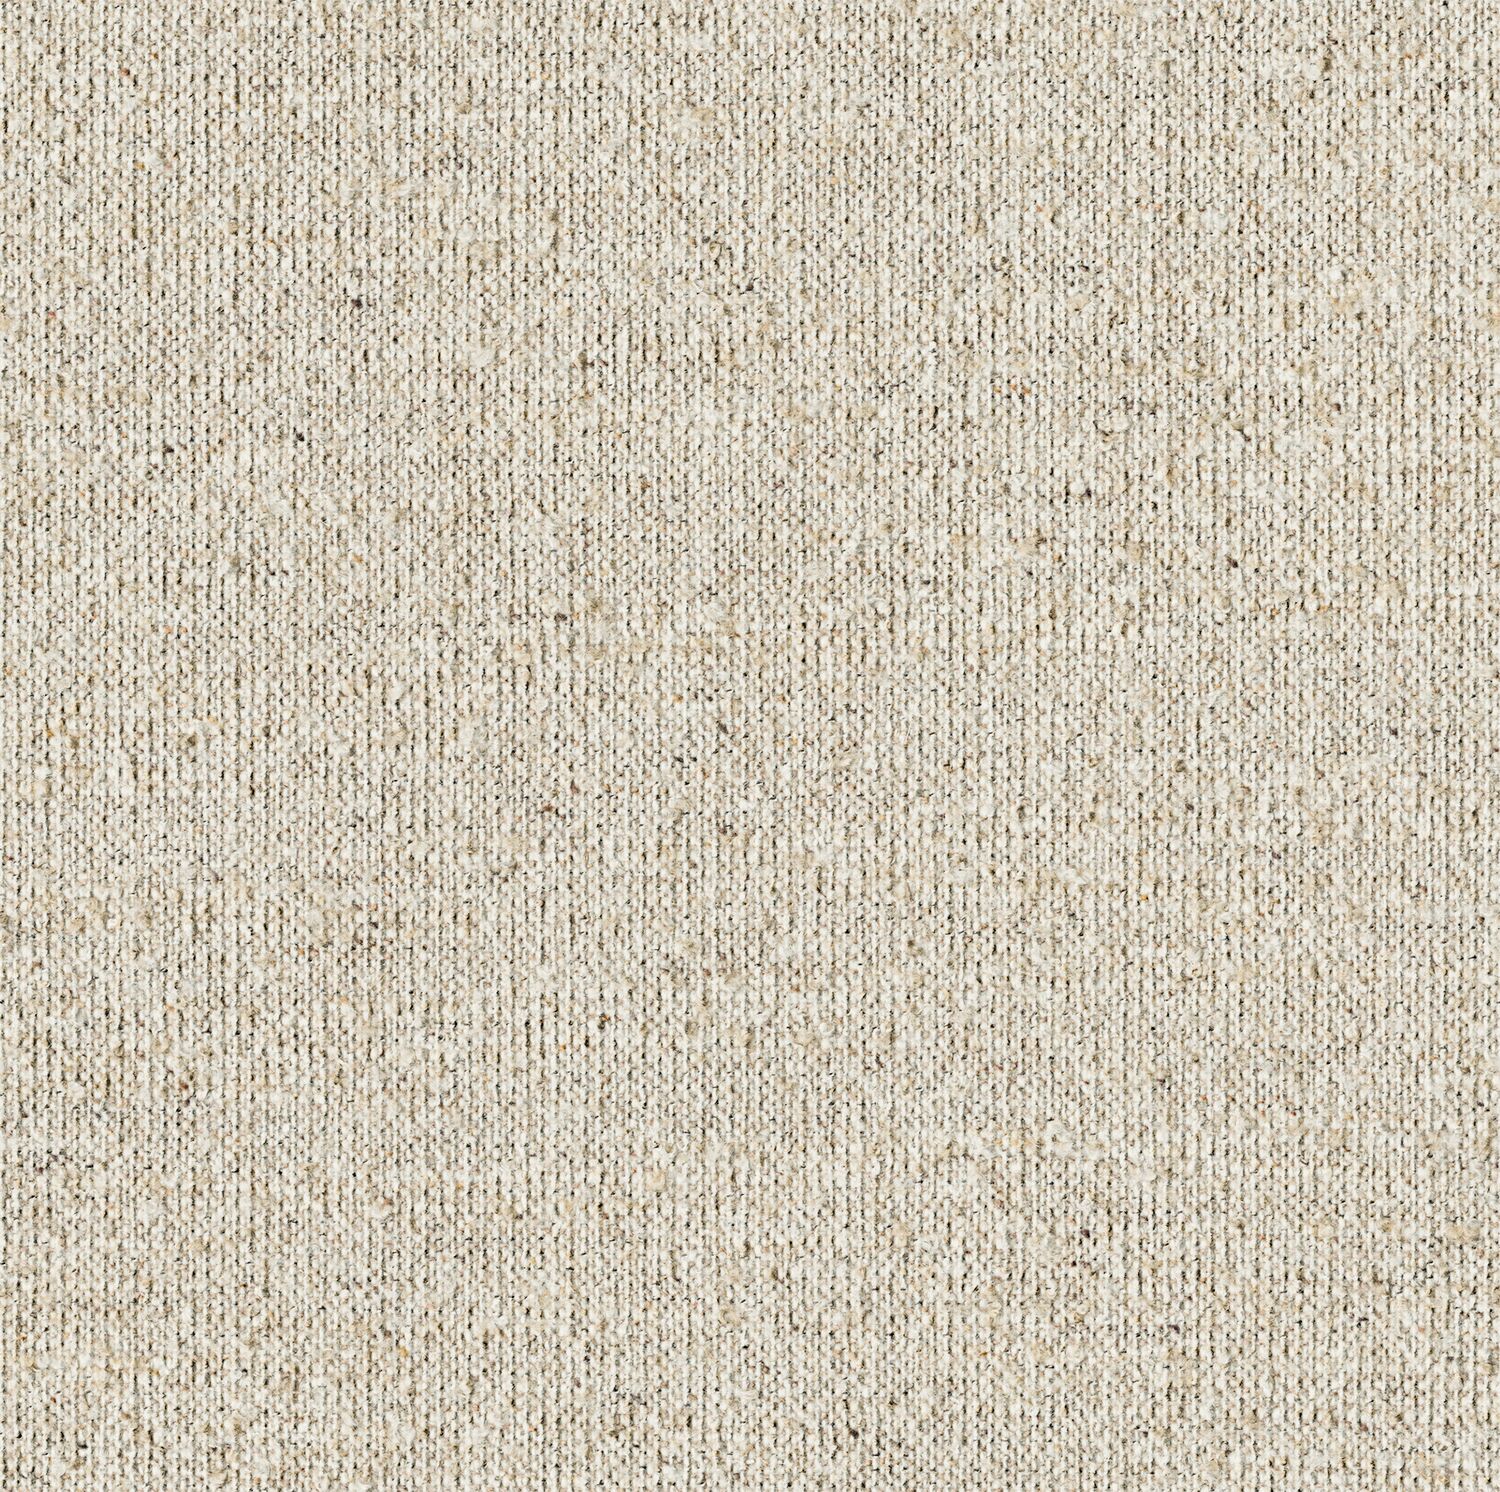 Everyday Boucle - Lamb's Ear - 4111 - 06 Tileable Swatches